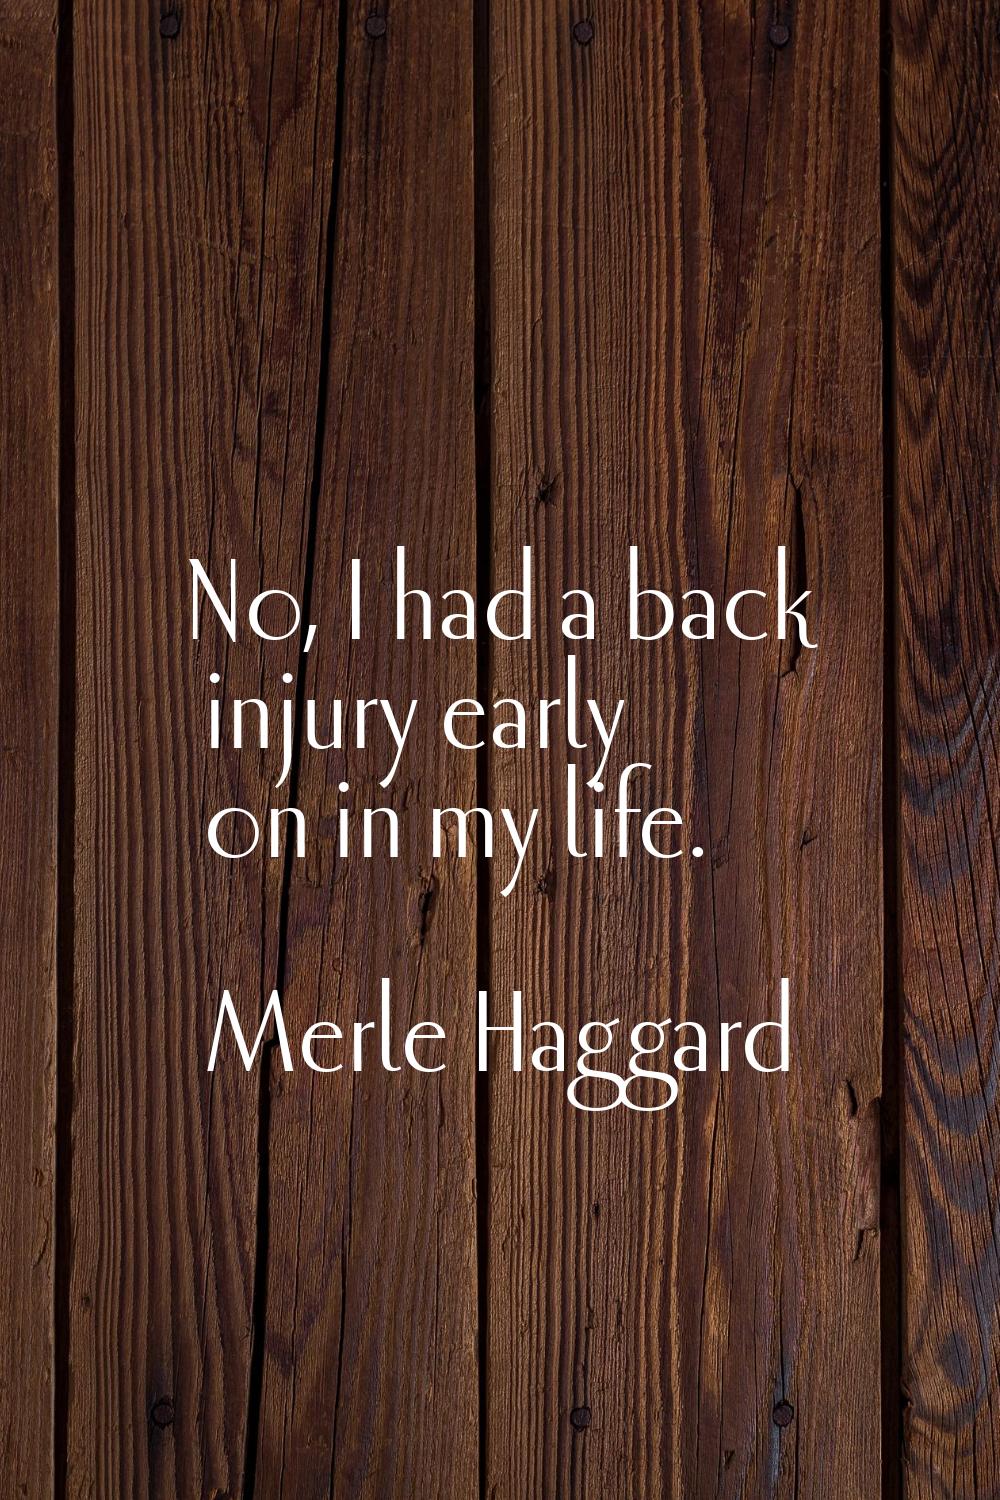 No, I had a back injury early on in my life.